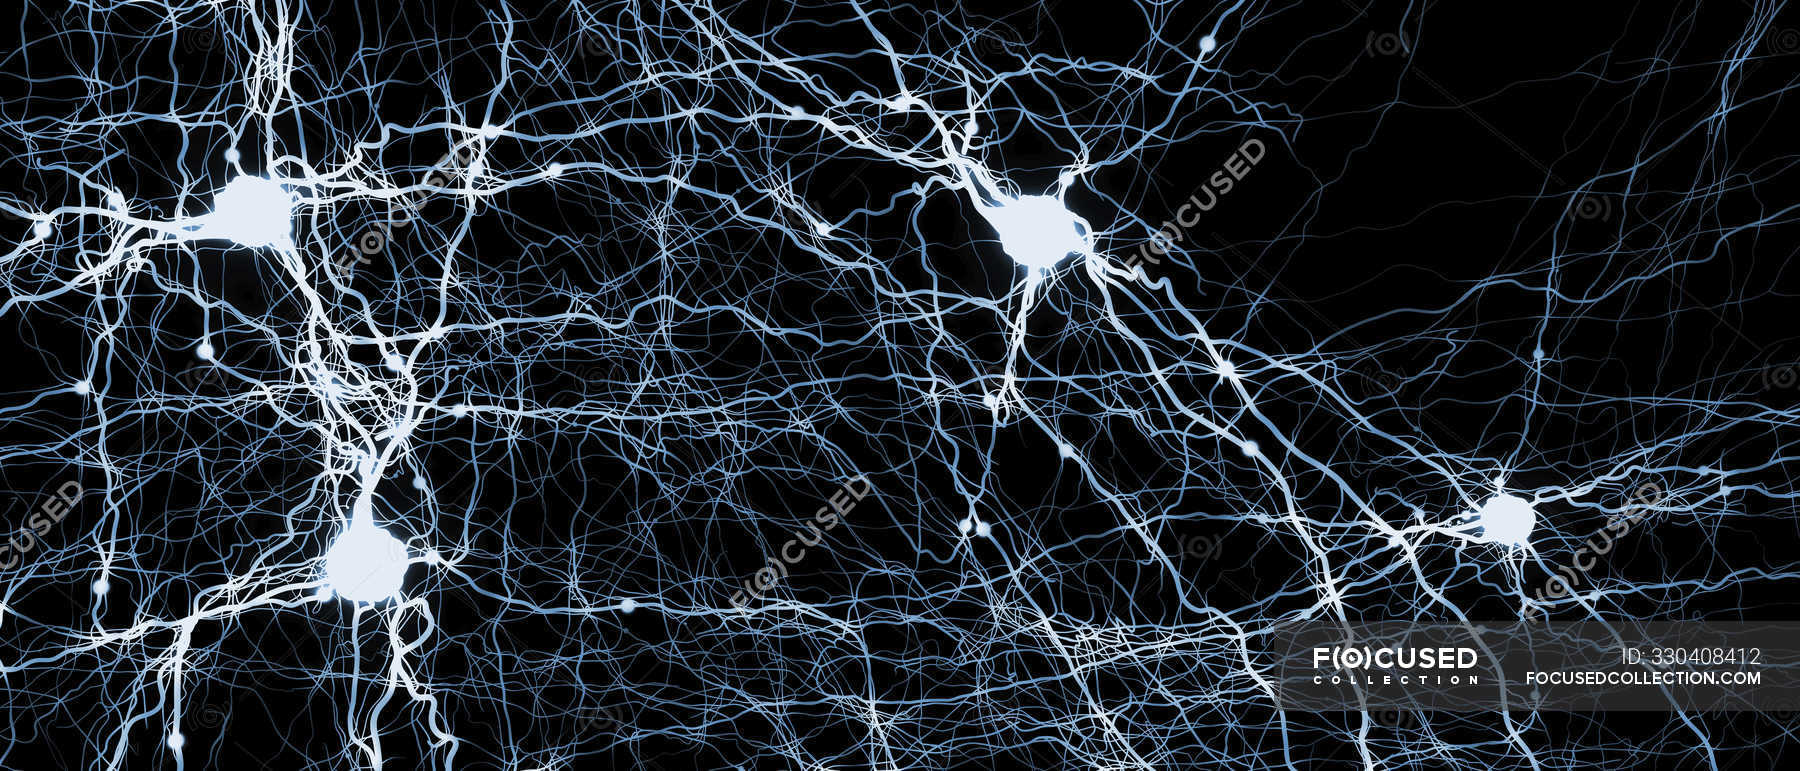 Abstract structure of neural network on dark background, digital  illustration. — neurones, connections - Stock Photo | #330408412